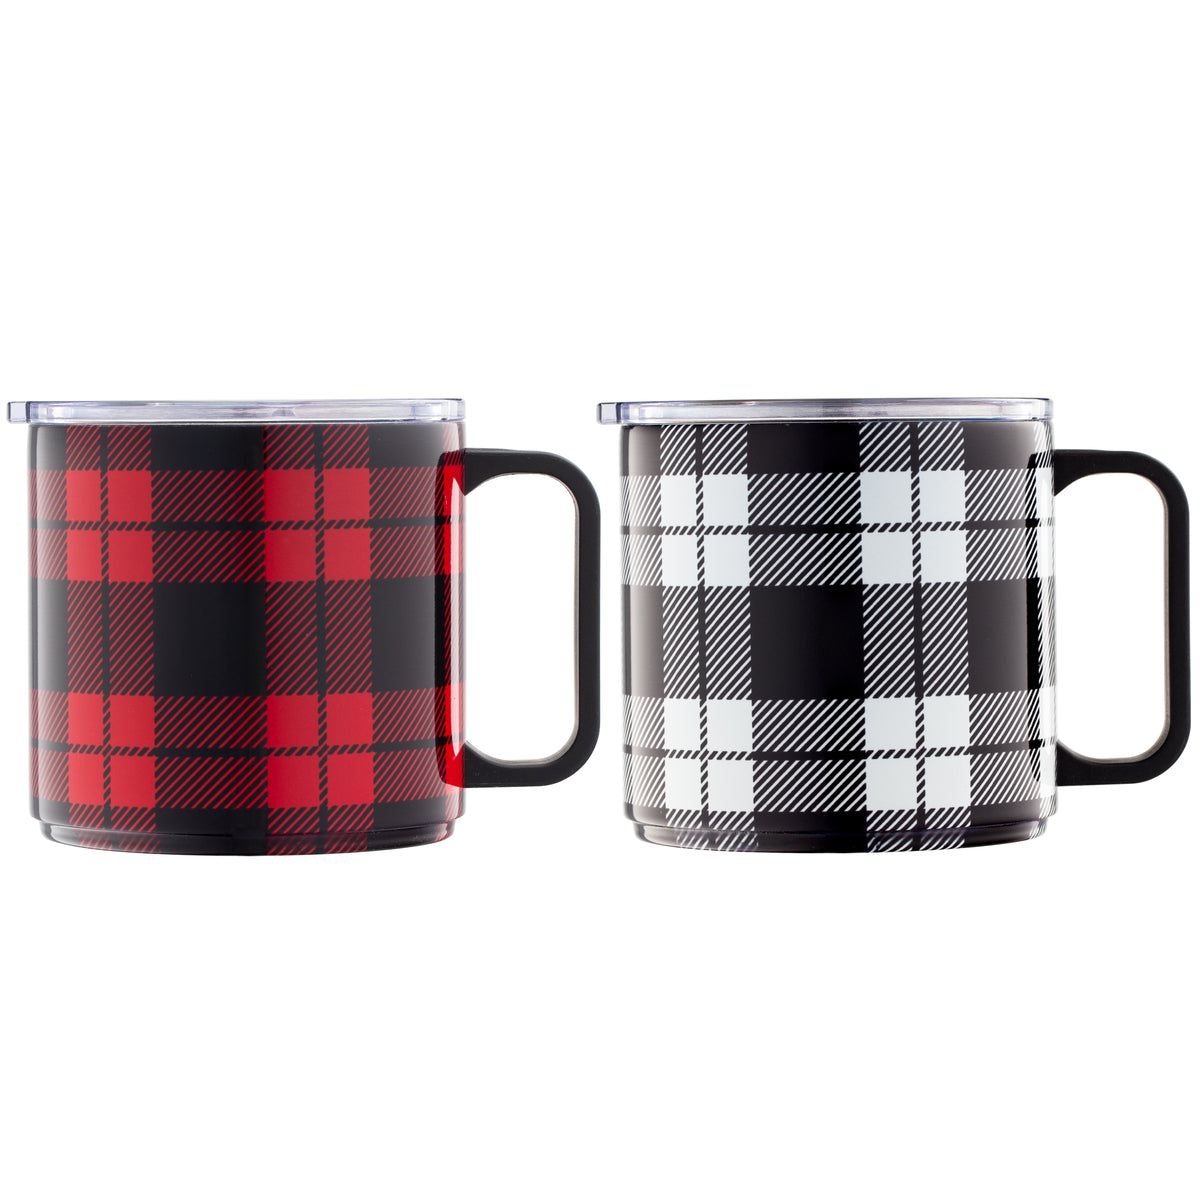 20 oz Stackable Snowflake Coffee Mugs, Set of 2 by Cambridge Home